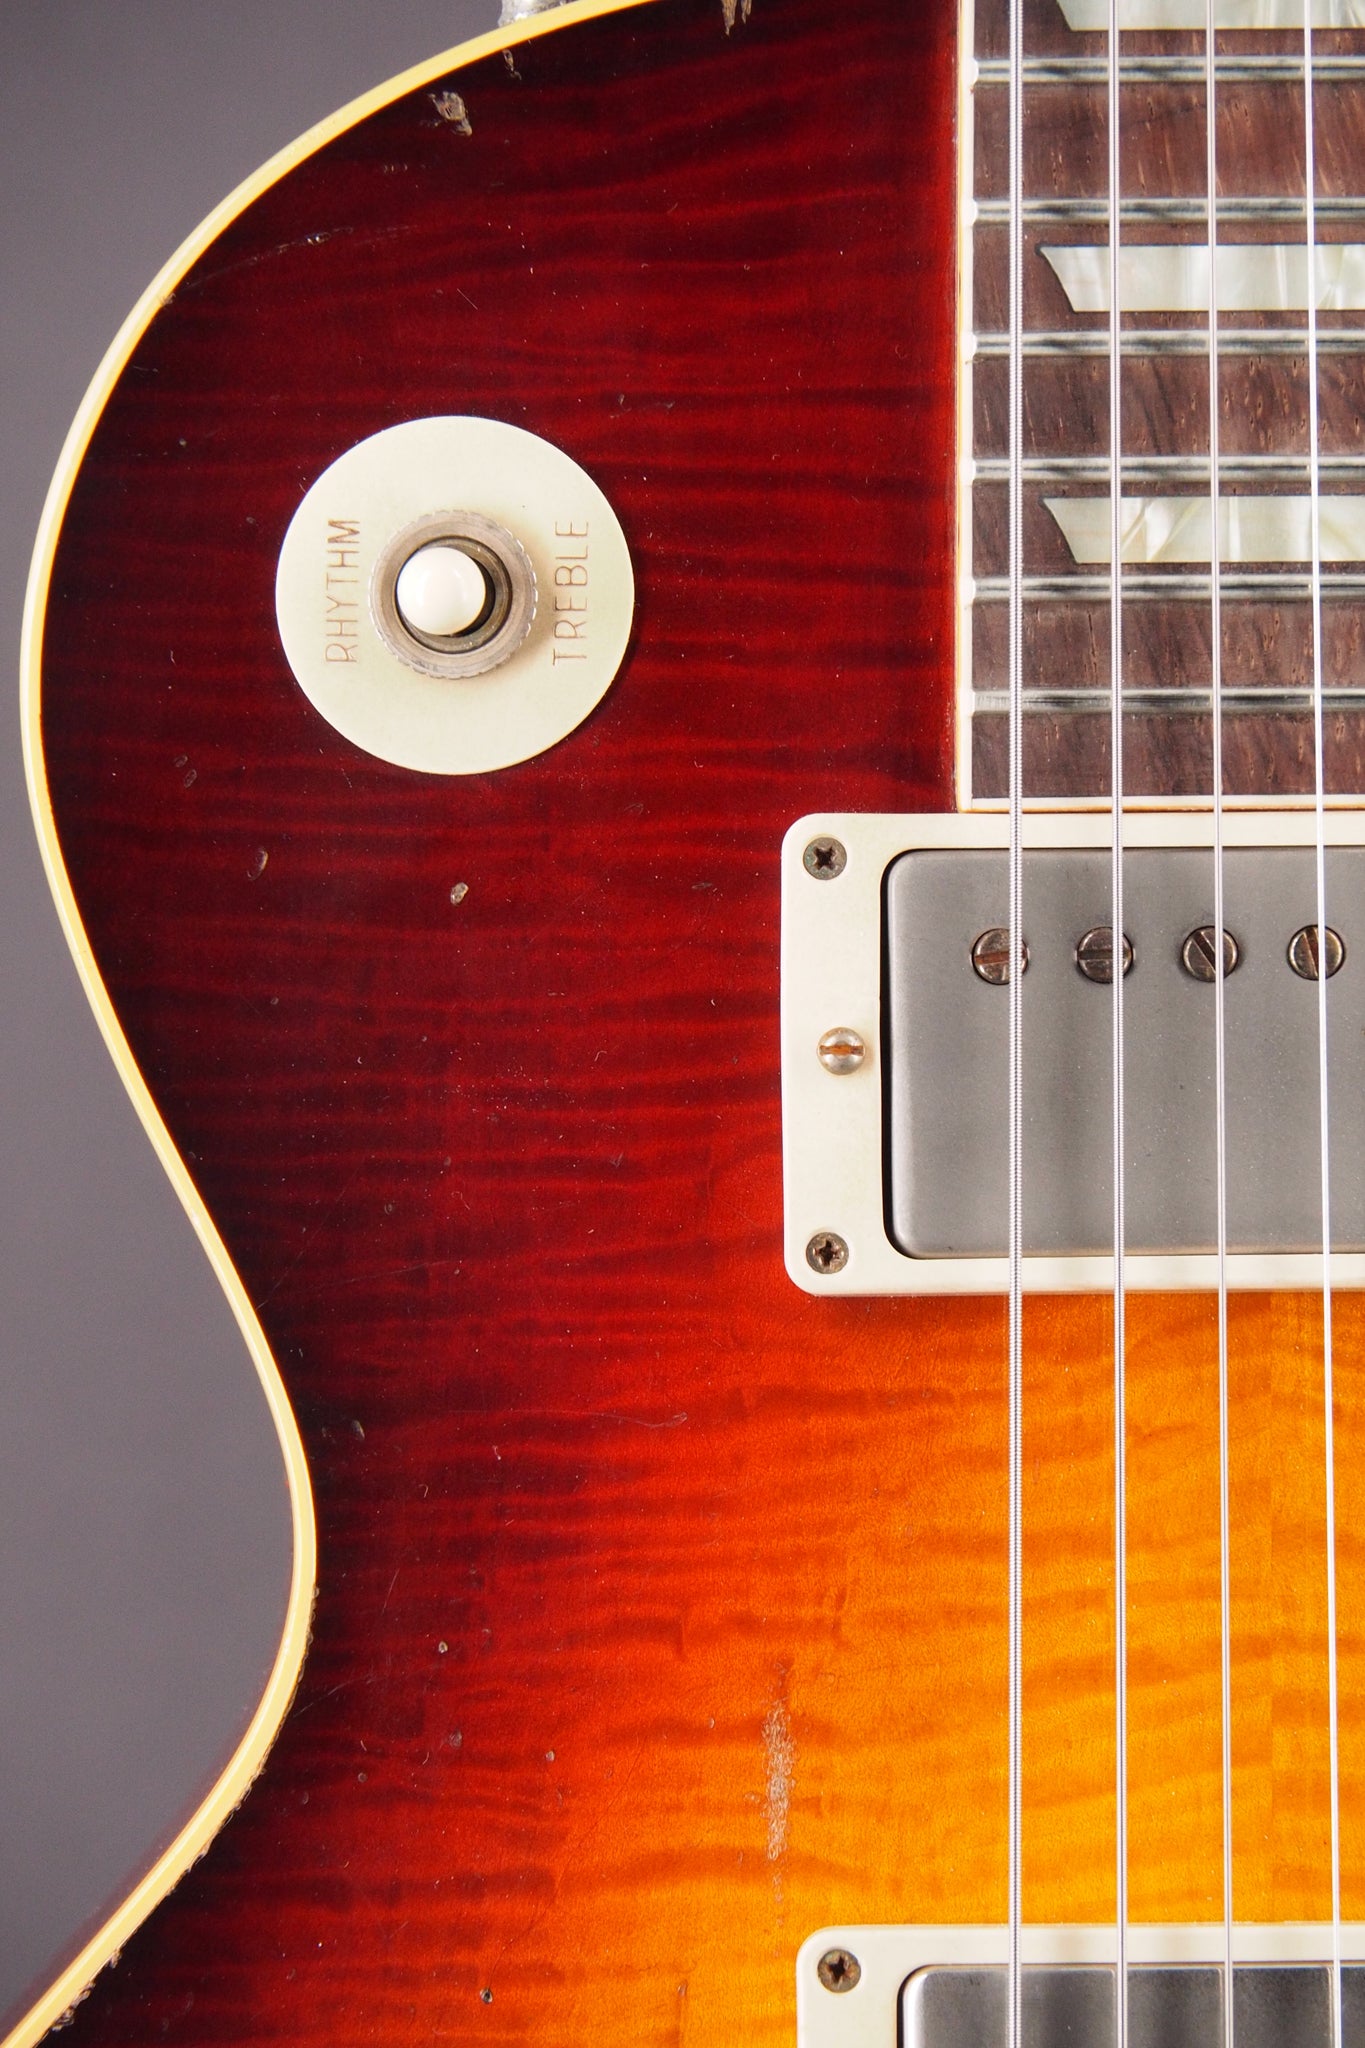 '59 Les Paul Standard Reissue Limited Edition Murphy Lab Aged with Brazilian Rosewood - Tom’s Tri-Burst